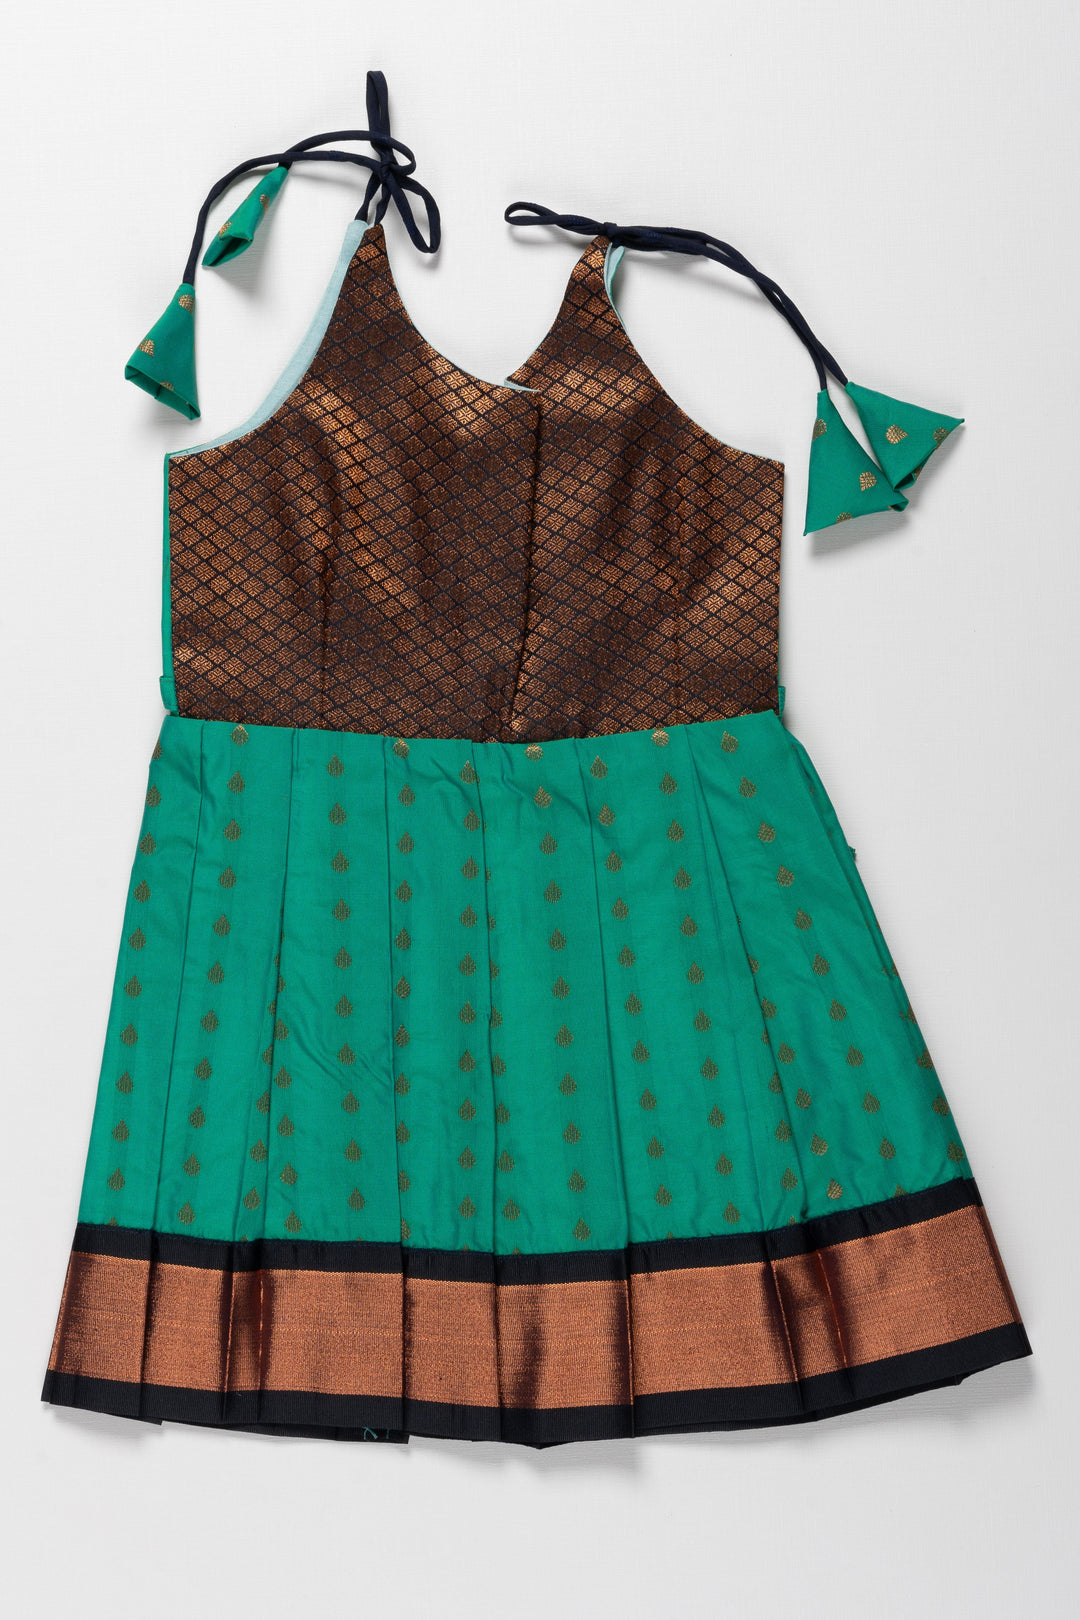 The Nesavu Tie-up Frock Enchanting Green and Bronze Silk Knot-Tie Frock for Ayush Homam and Noolukettu: A Blend of Tradition Nesavu 14 (6M) / Green / Style 3 T378C-14 Chic Green and Bronze Silk Dresses for Girls | Elegant Party Wear with KnotTie Detail | The Nesavu